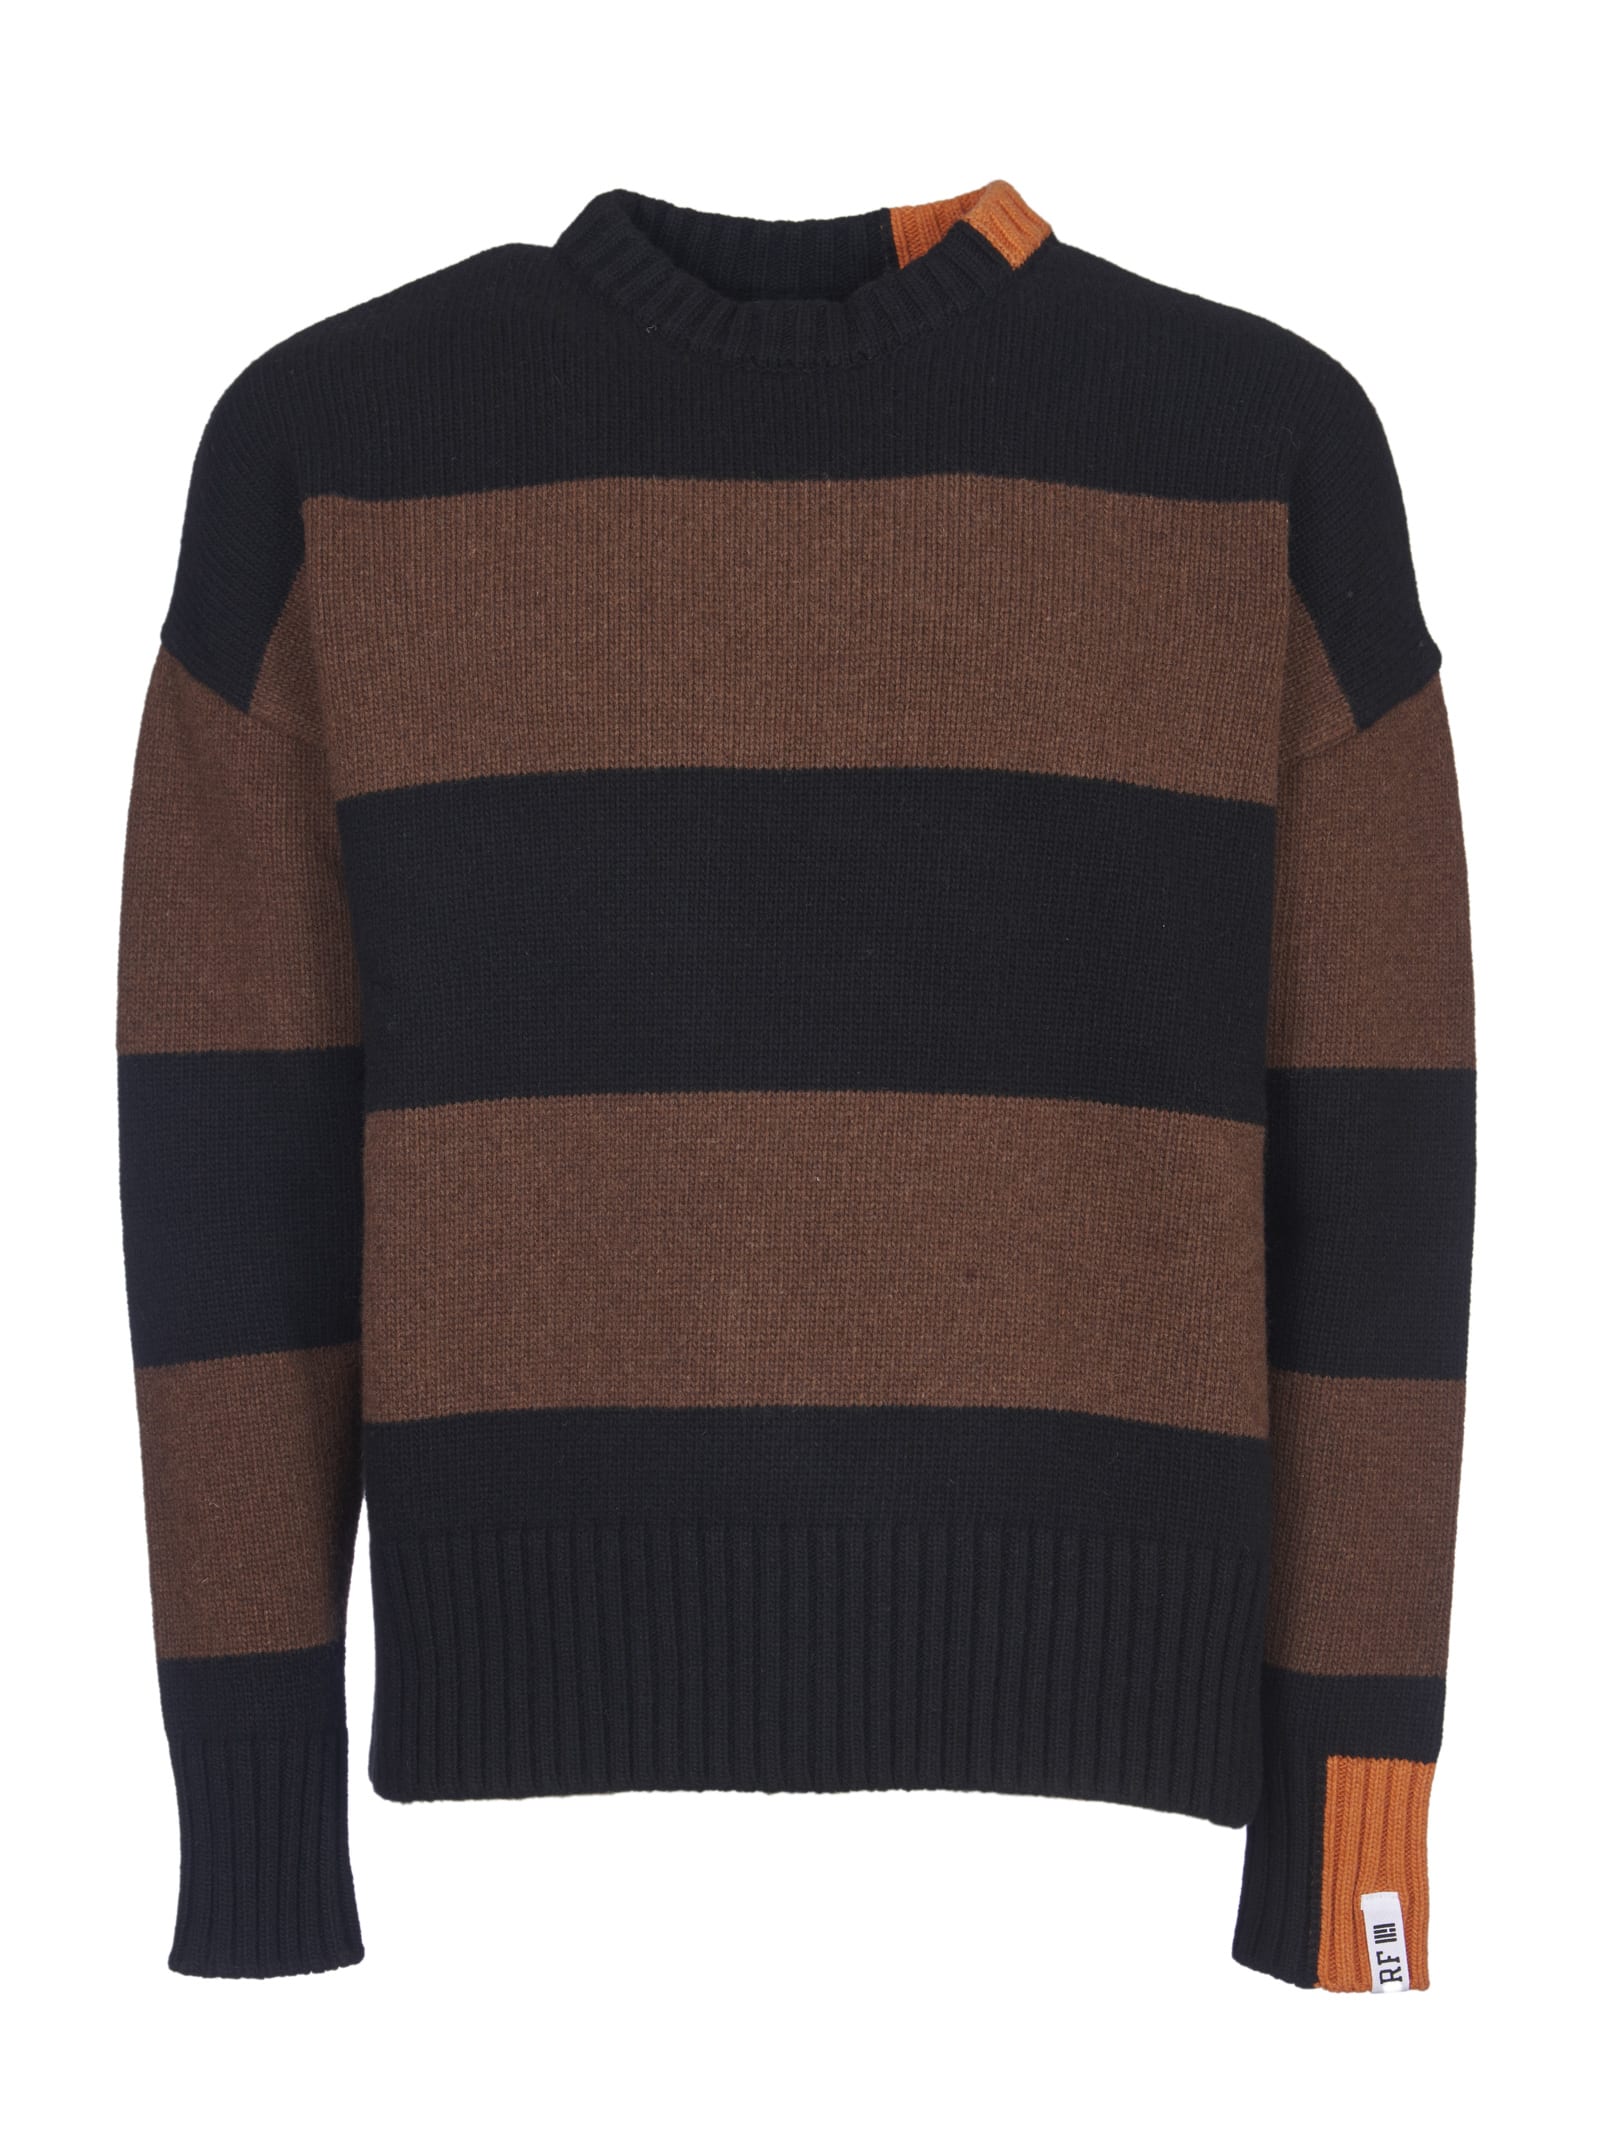 Right For Striped Crewneck Sweater